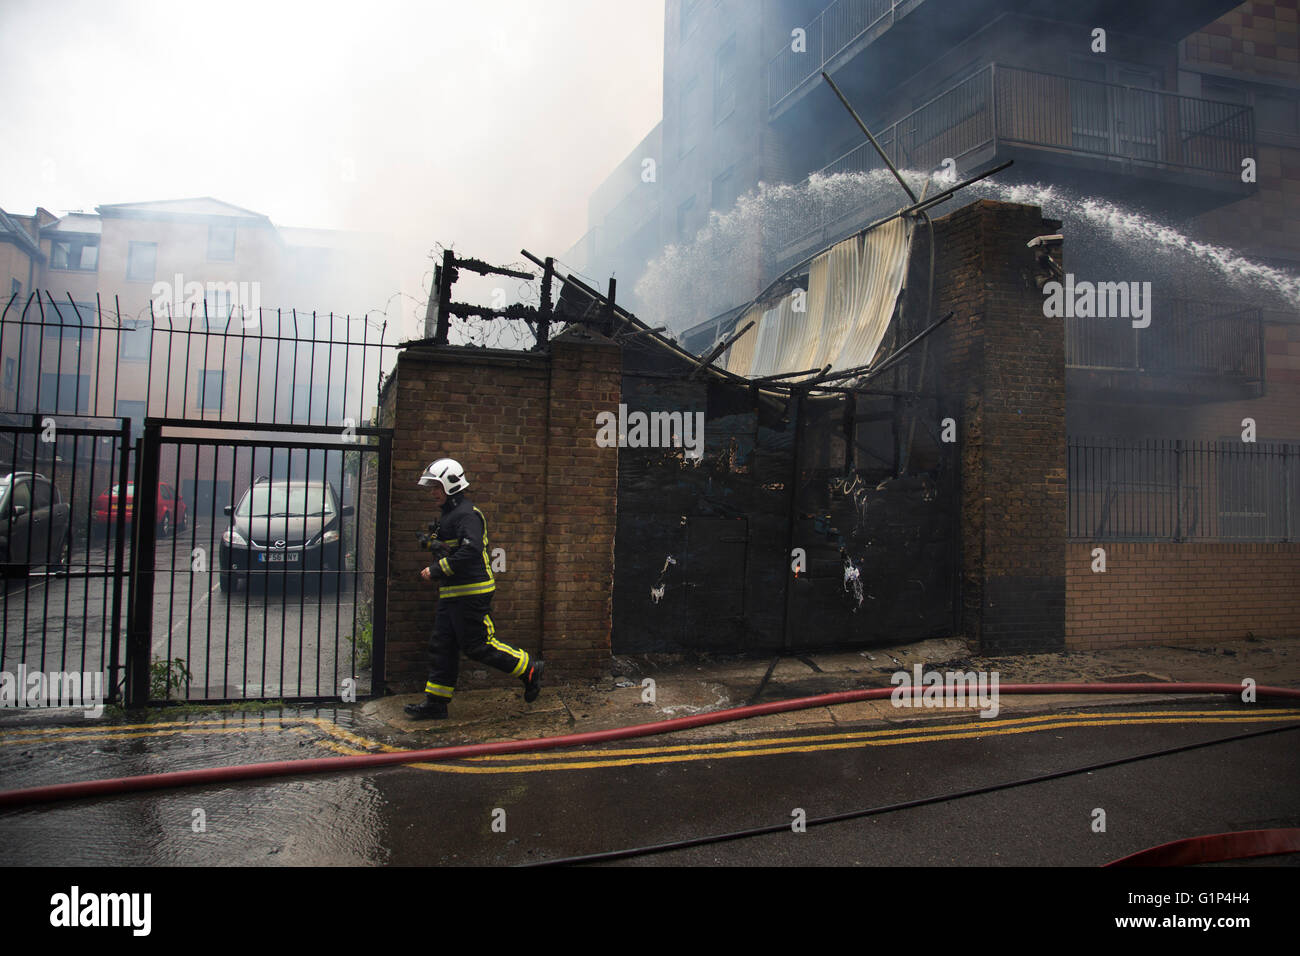 Fire fighters tackle a fire in a block of flats in Brodlove Lane in Wapping, London, United Kingdom. According to sources the fire was possibly due to gas cylinders which were in a builders yard at the base of the building. A local resident said that there were often fires in this area, though he didn't know what was the cause. Stock Photo